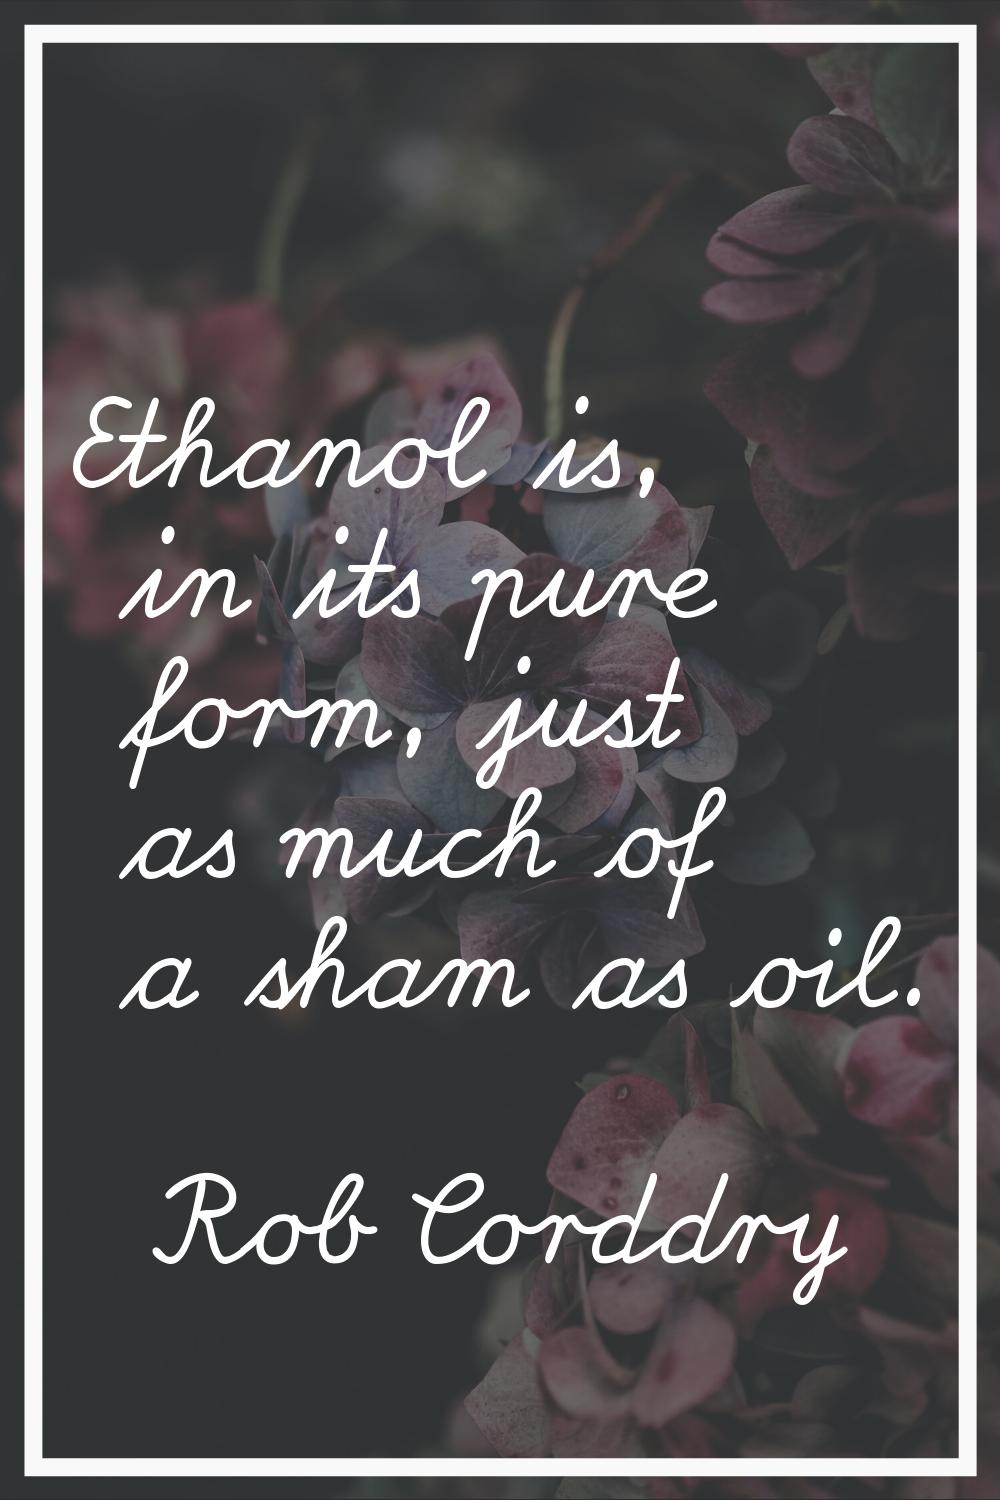 Ethanol is, in its pure form, just as much of a sham as oil.